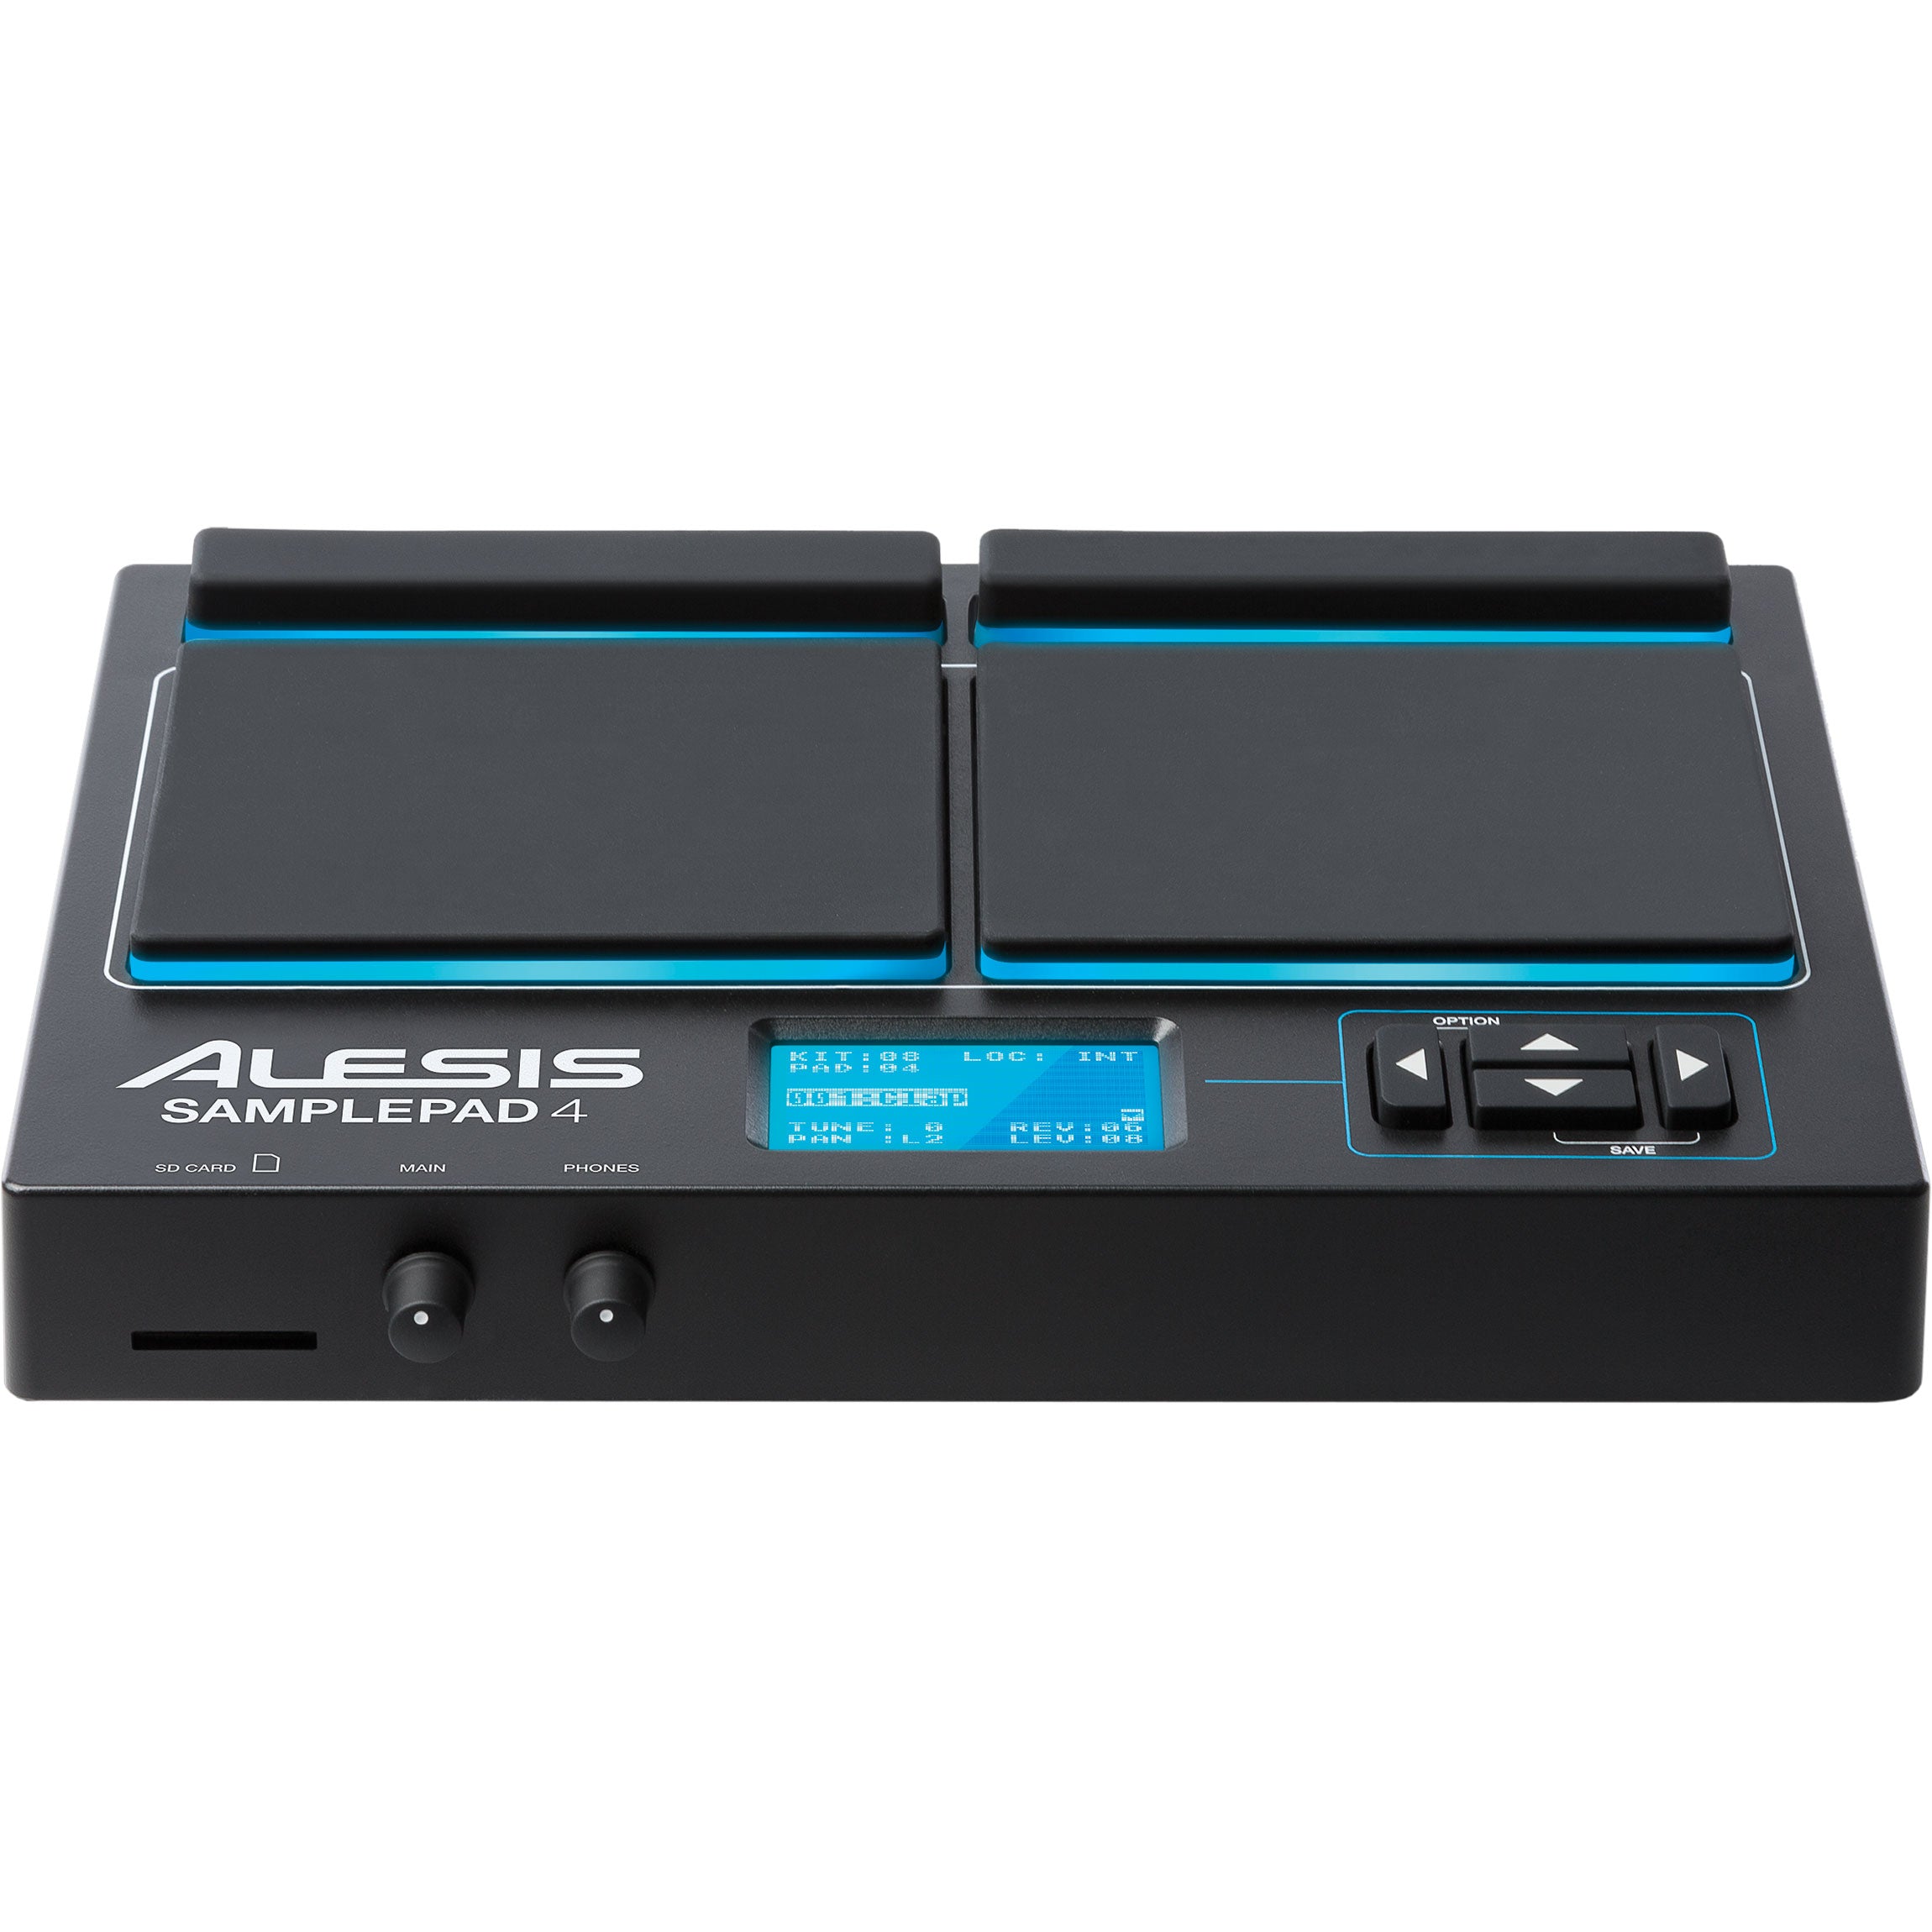 Alesis SamplePad 4, Four-Pad Percussion and Sample-Triggering Instrument